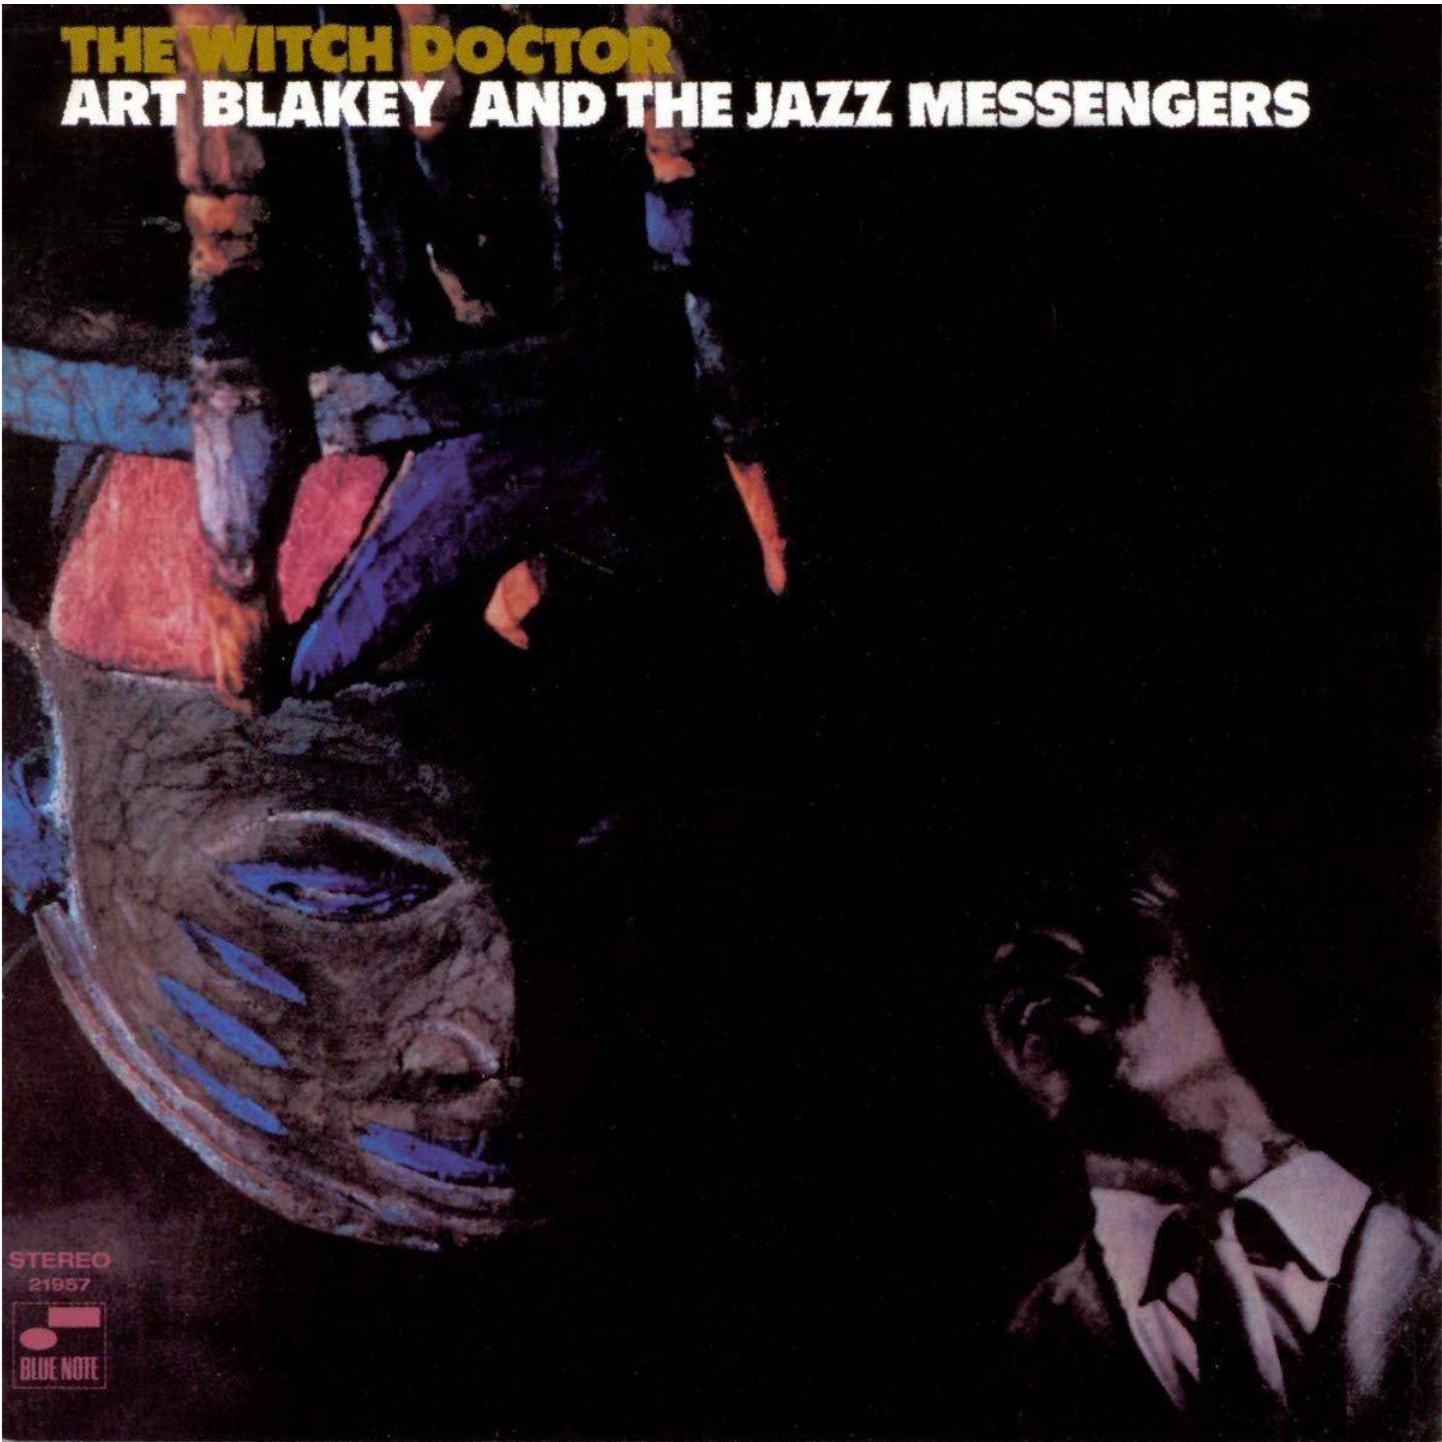 Art Blakey &amp; The Jazz Messengers - The Witch Doctor - Tone Poet LP